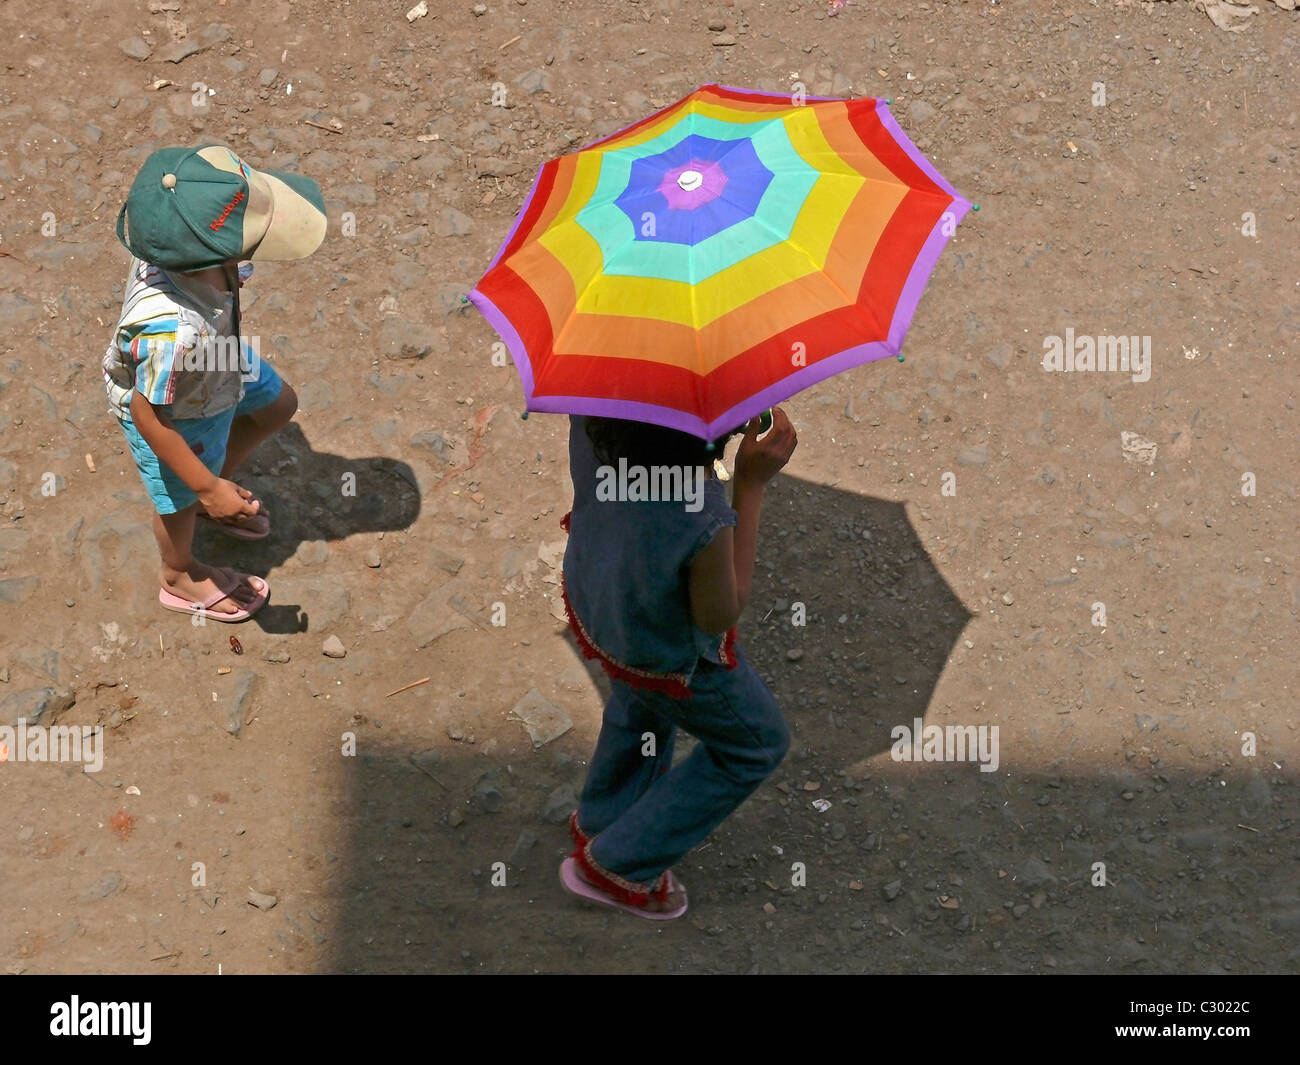 A Teenager, Girl with a Colorful Umbrella Stock Photo